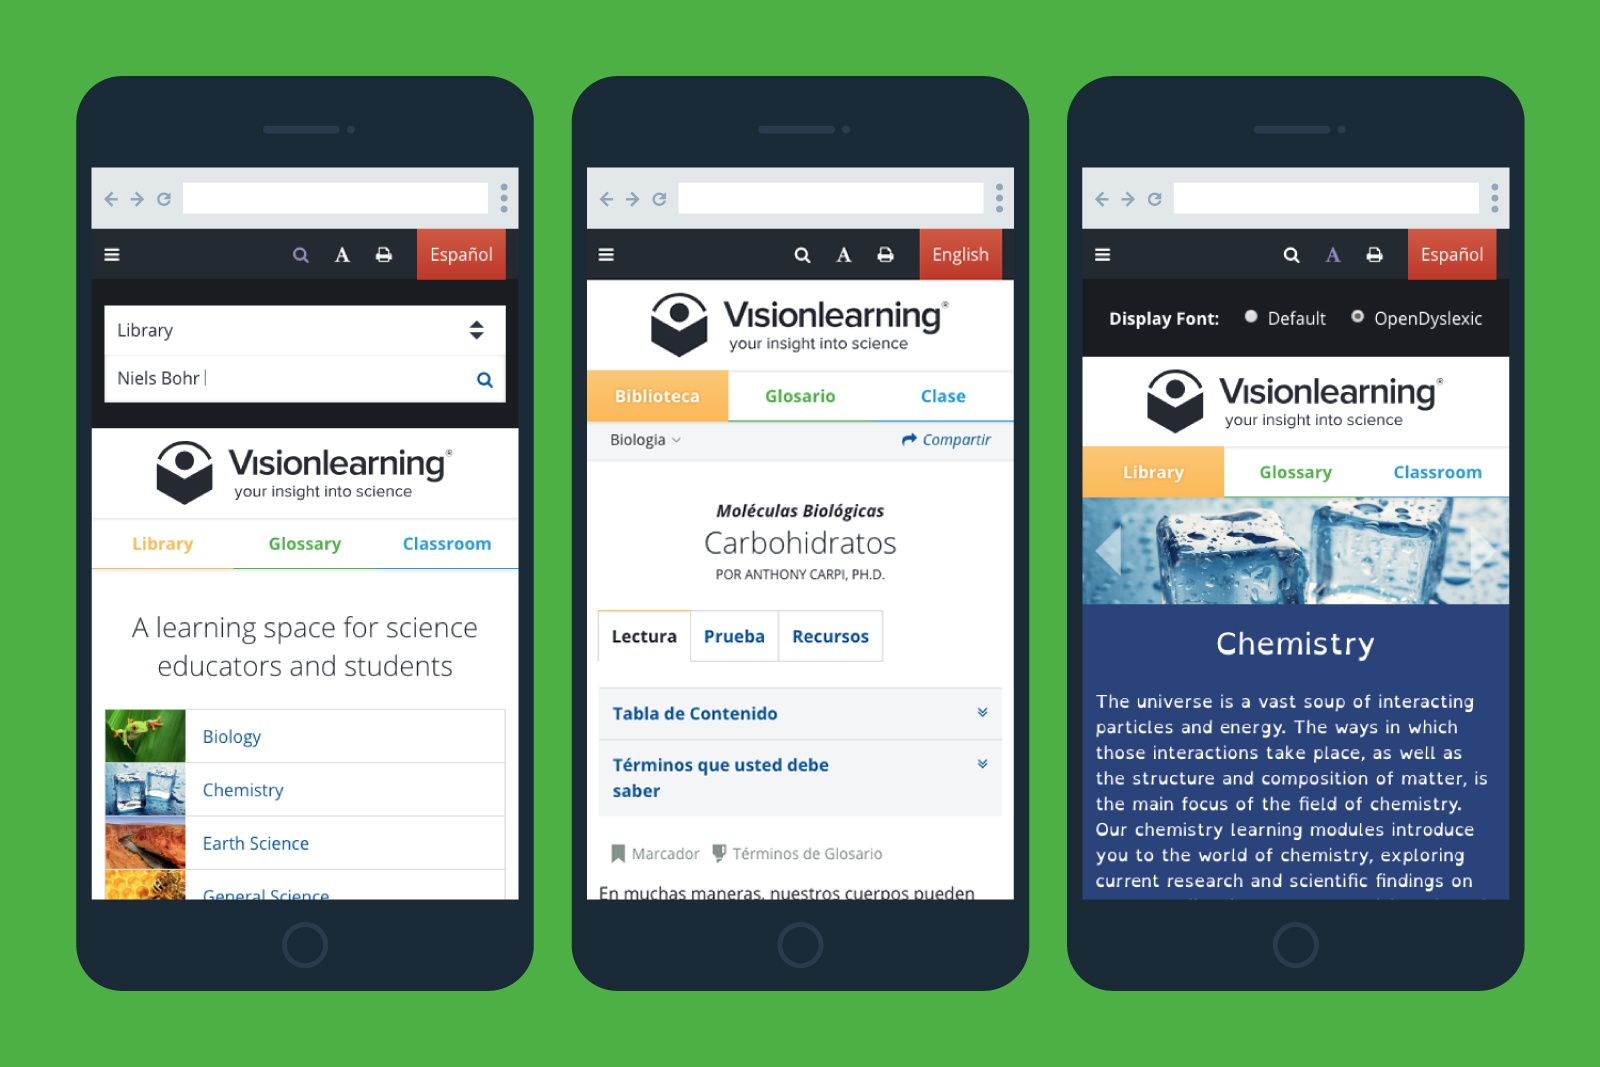 Depiction of the Visionlearning website on mobile devices